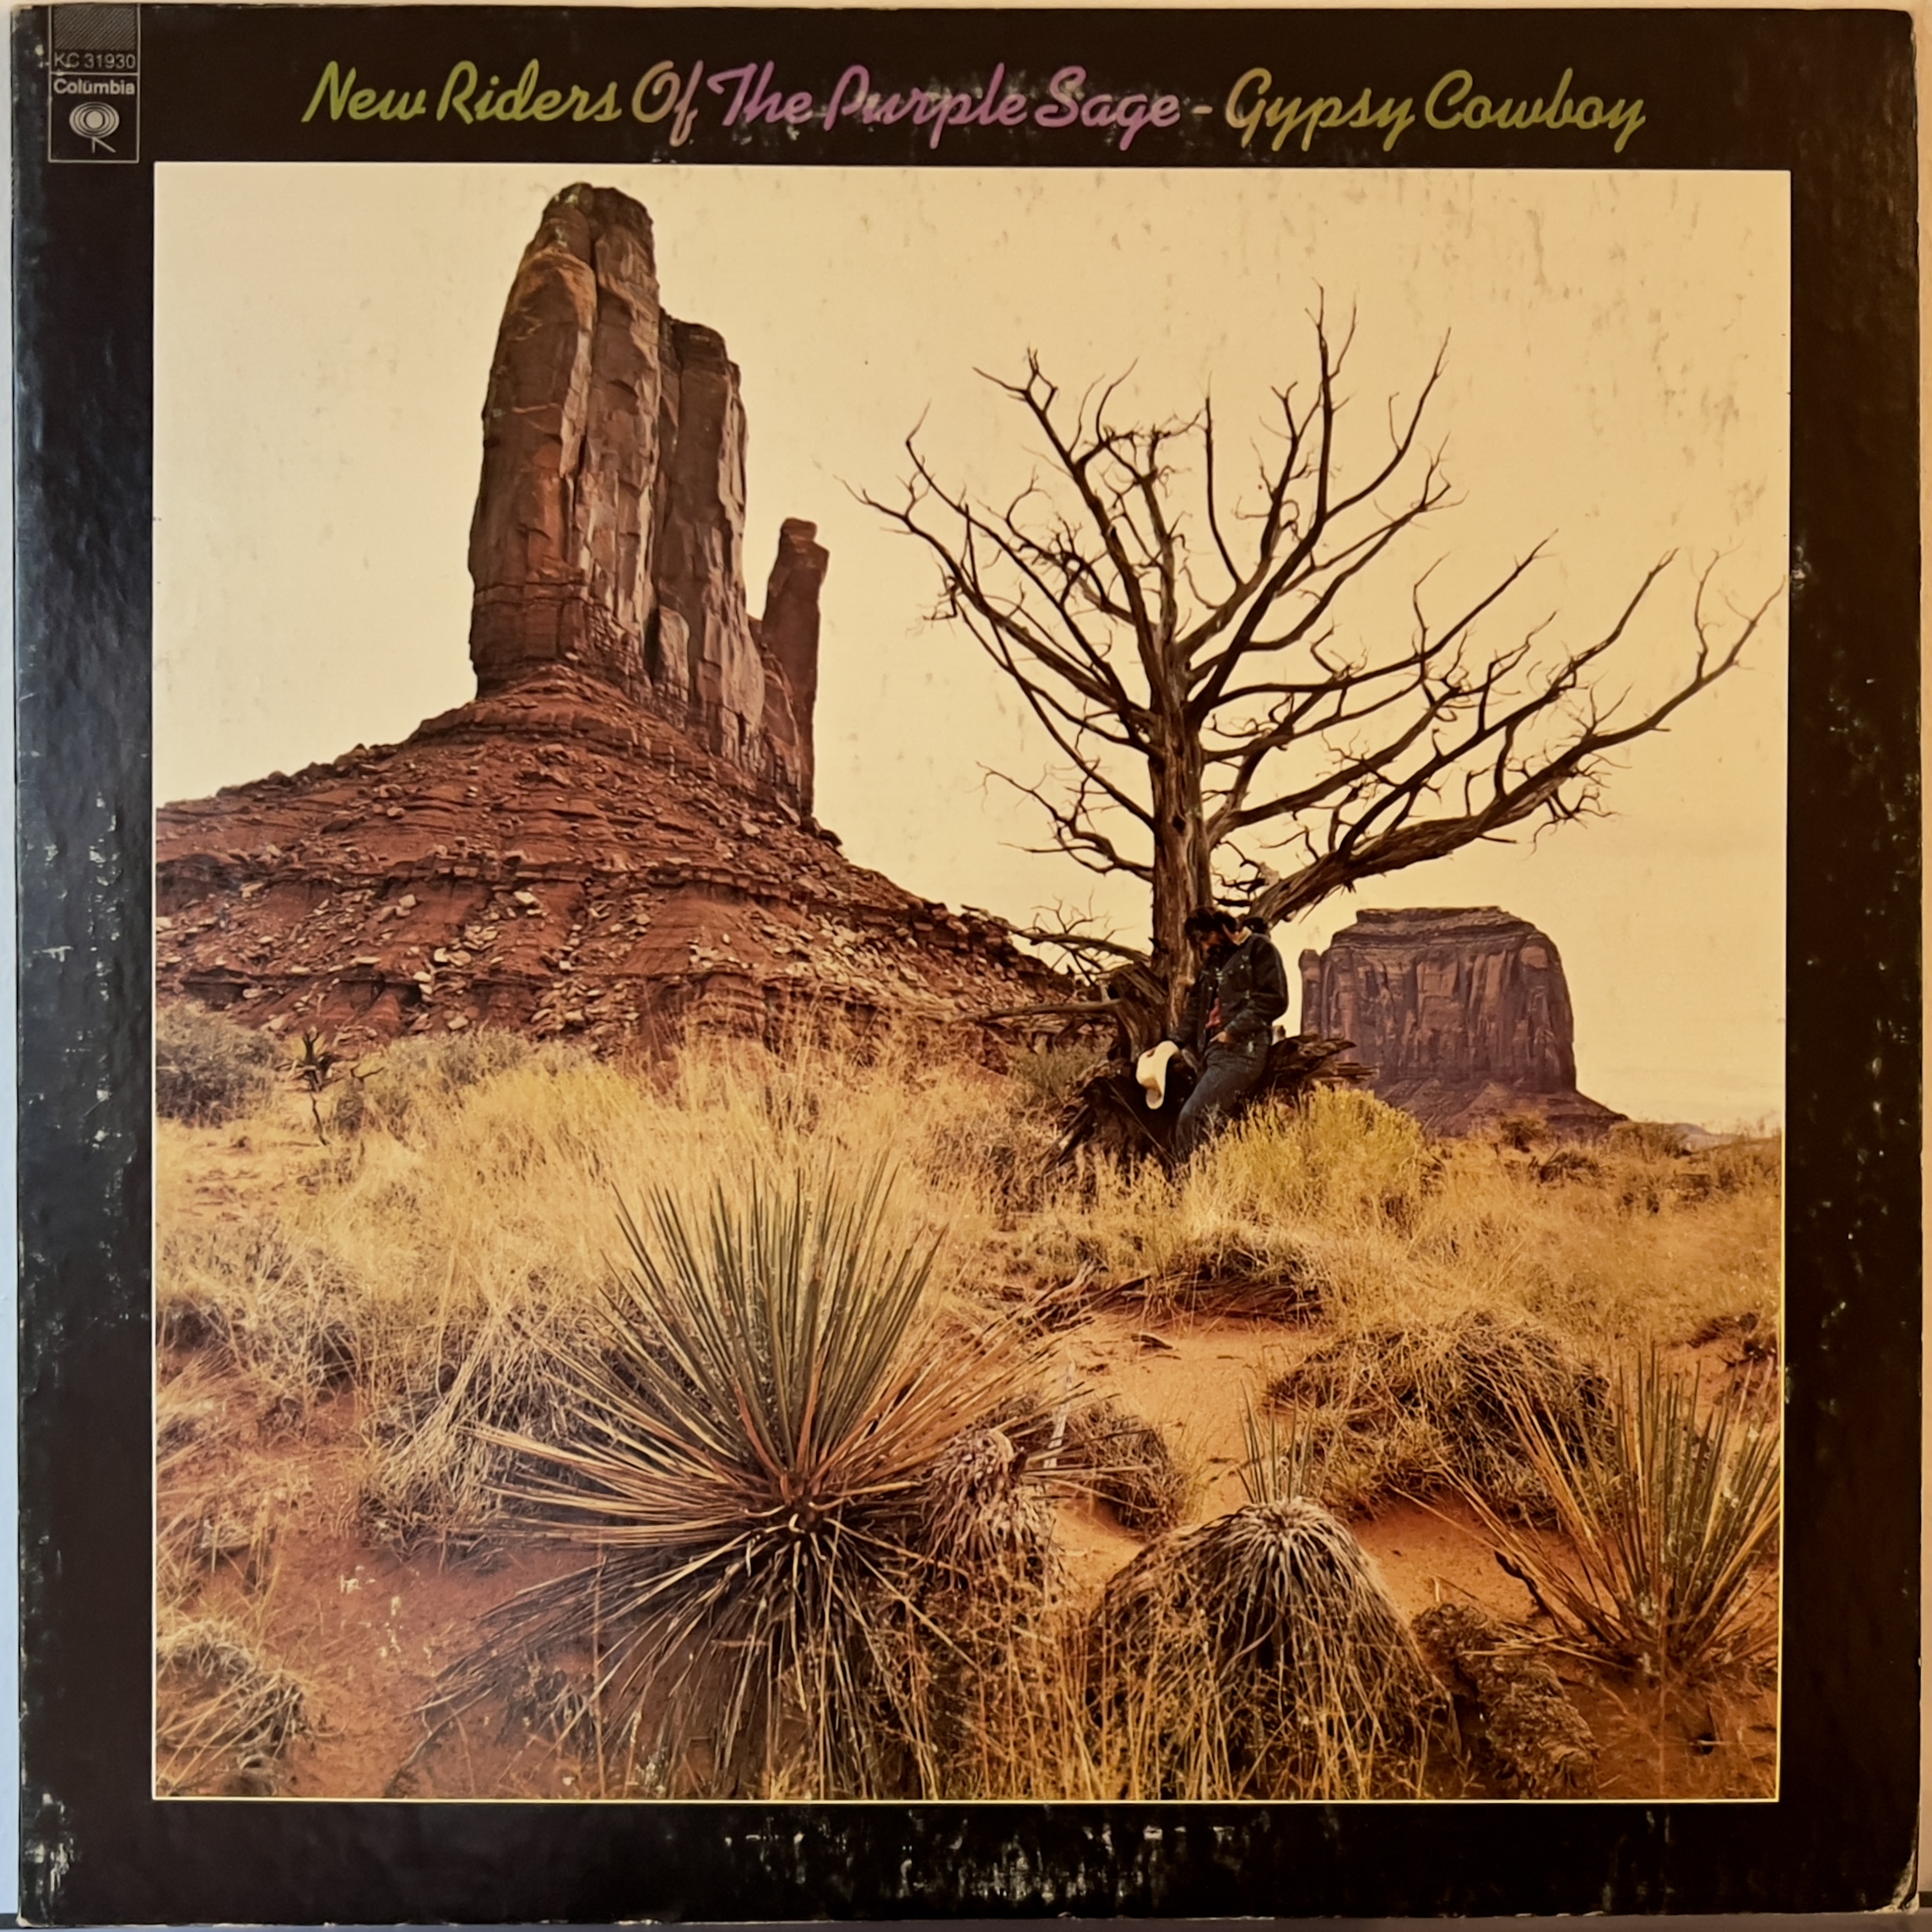 Gypsy Cowboy by New Riders of the Purple Sage